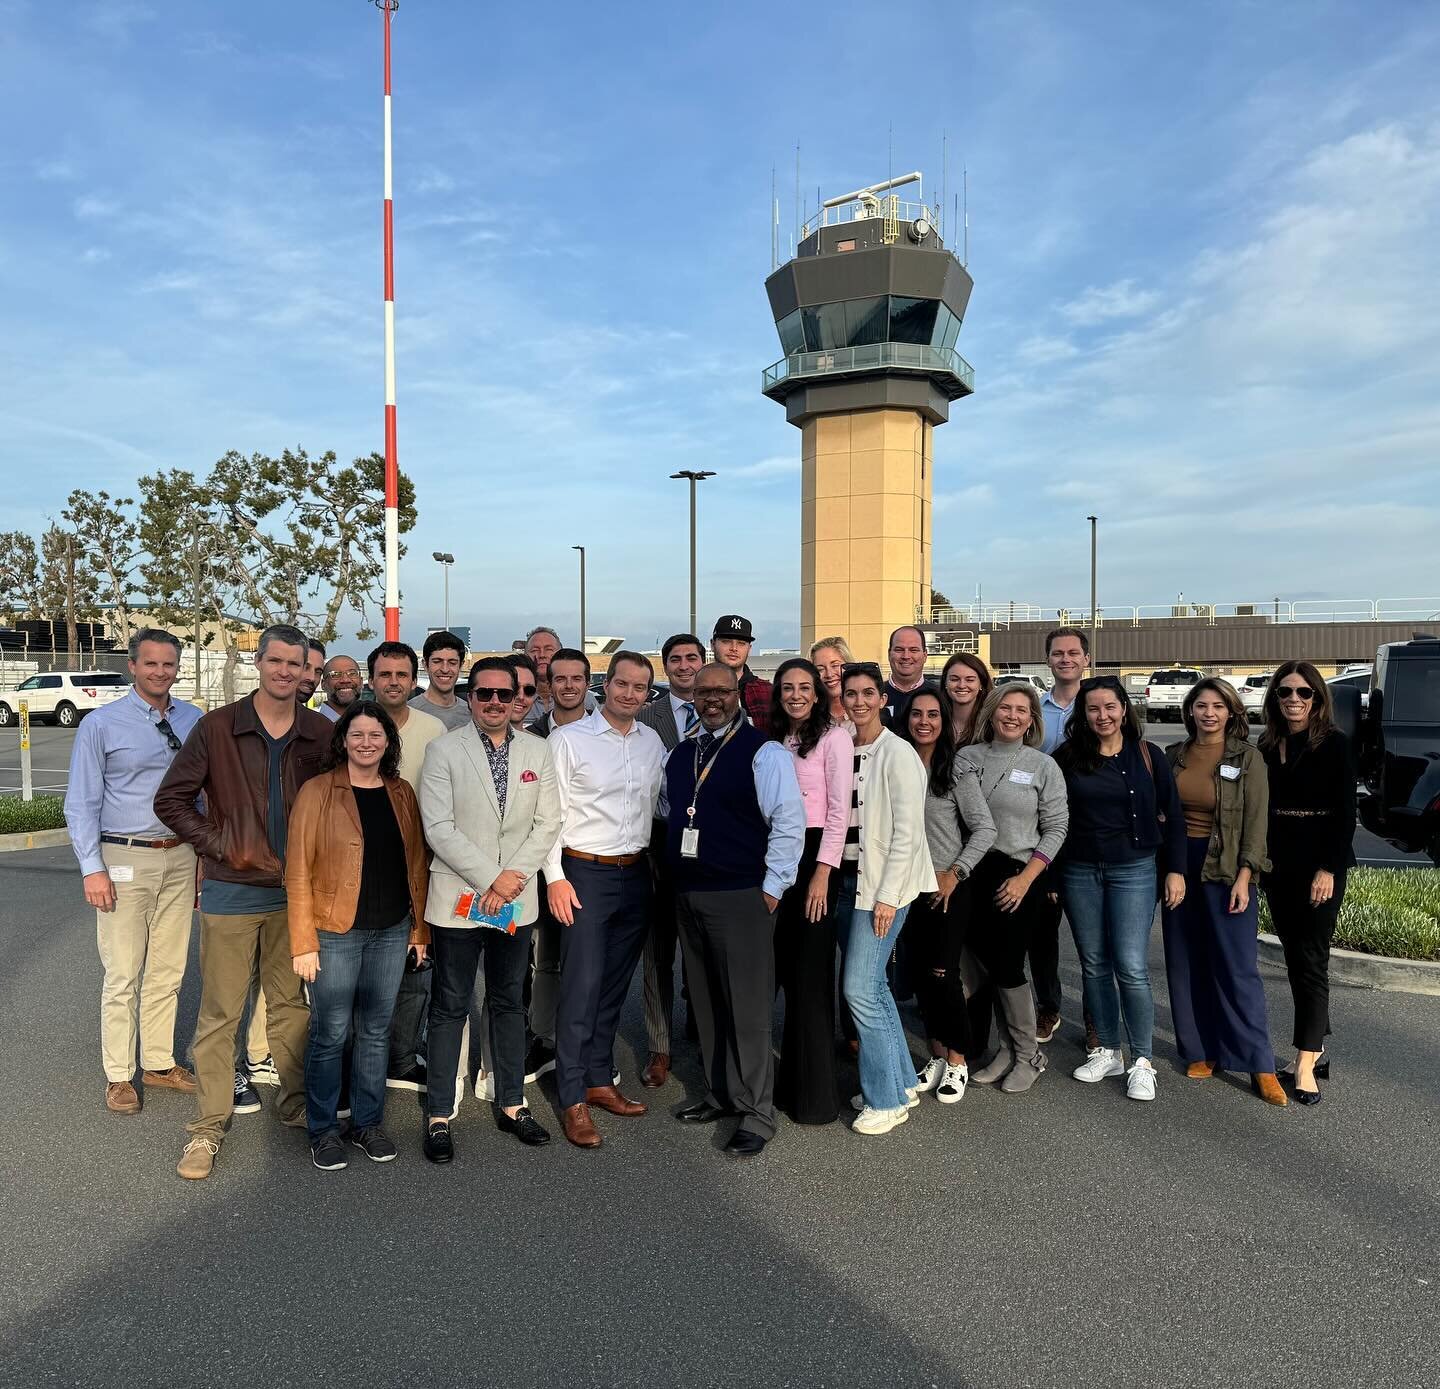 Thank you to board member @drewteicheira for setting up an eventful private tour of @johnwayneair !

Our DCP graduates learned about how important the airport is to our county.